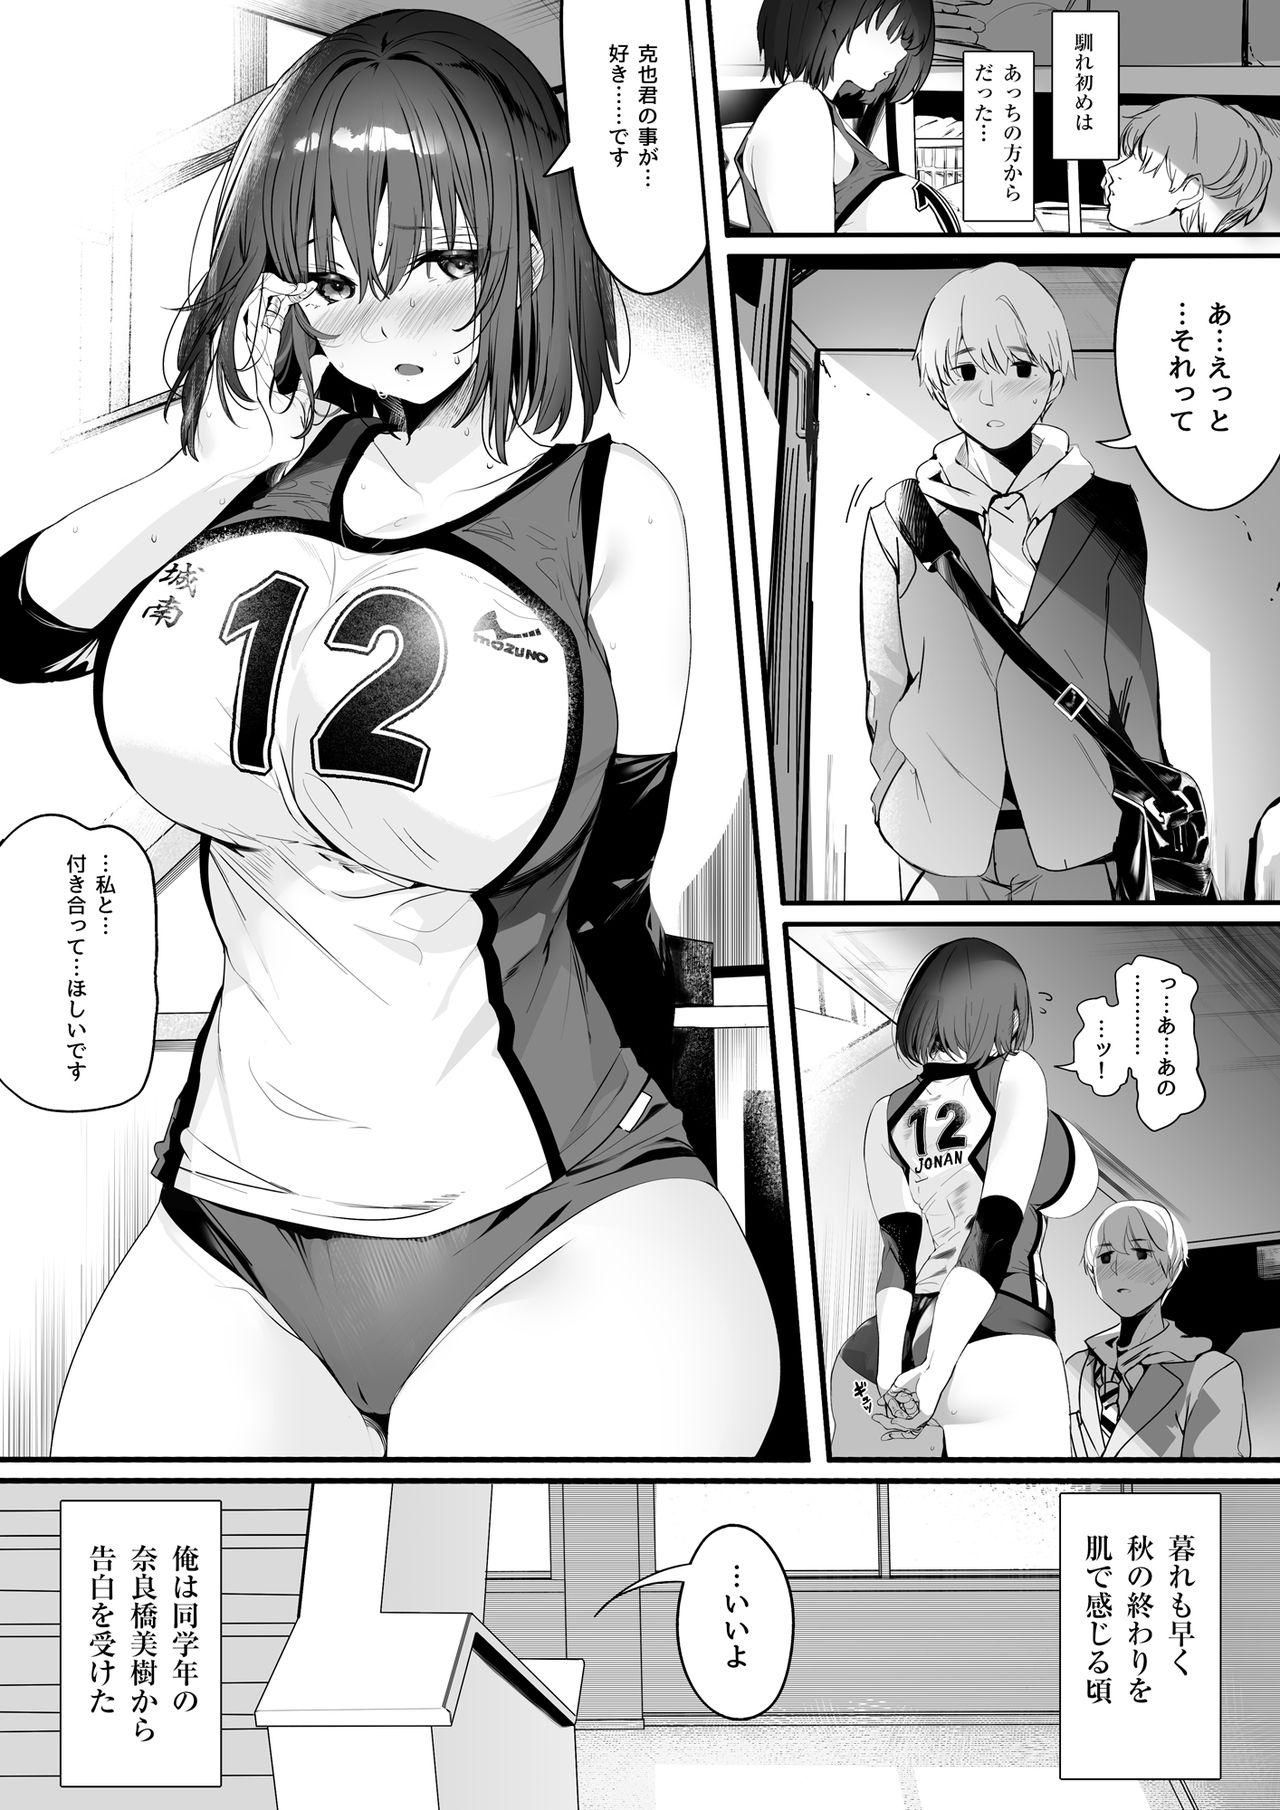 【Image】The most erotic club activity is the women's volleyball club wwwwww 15